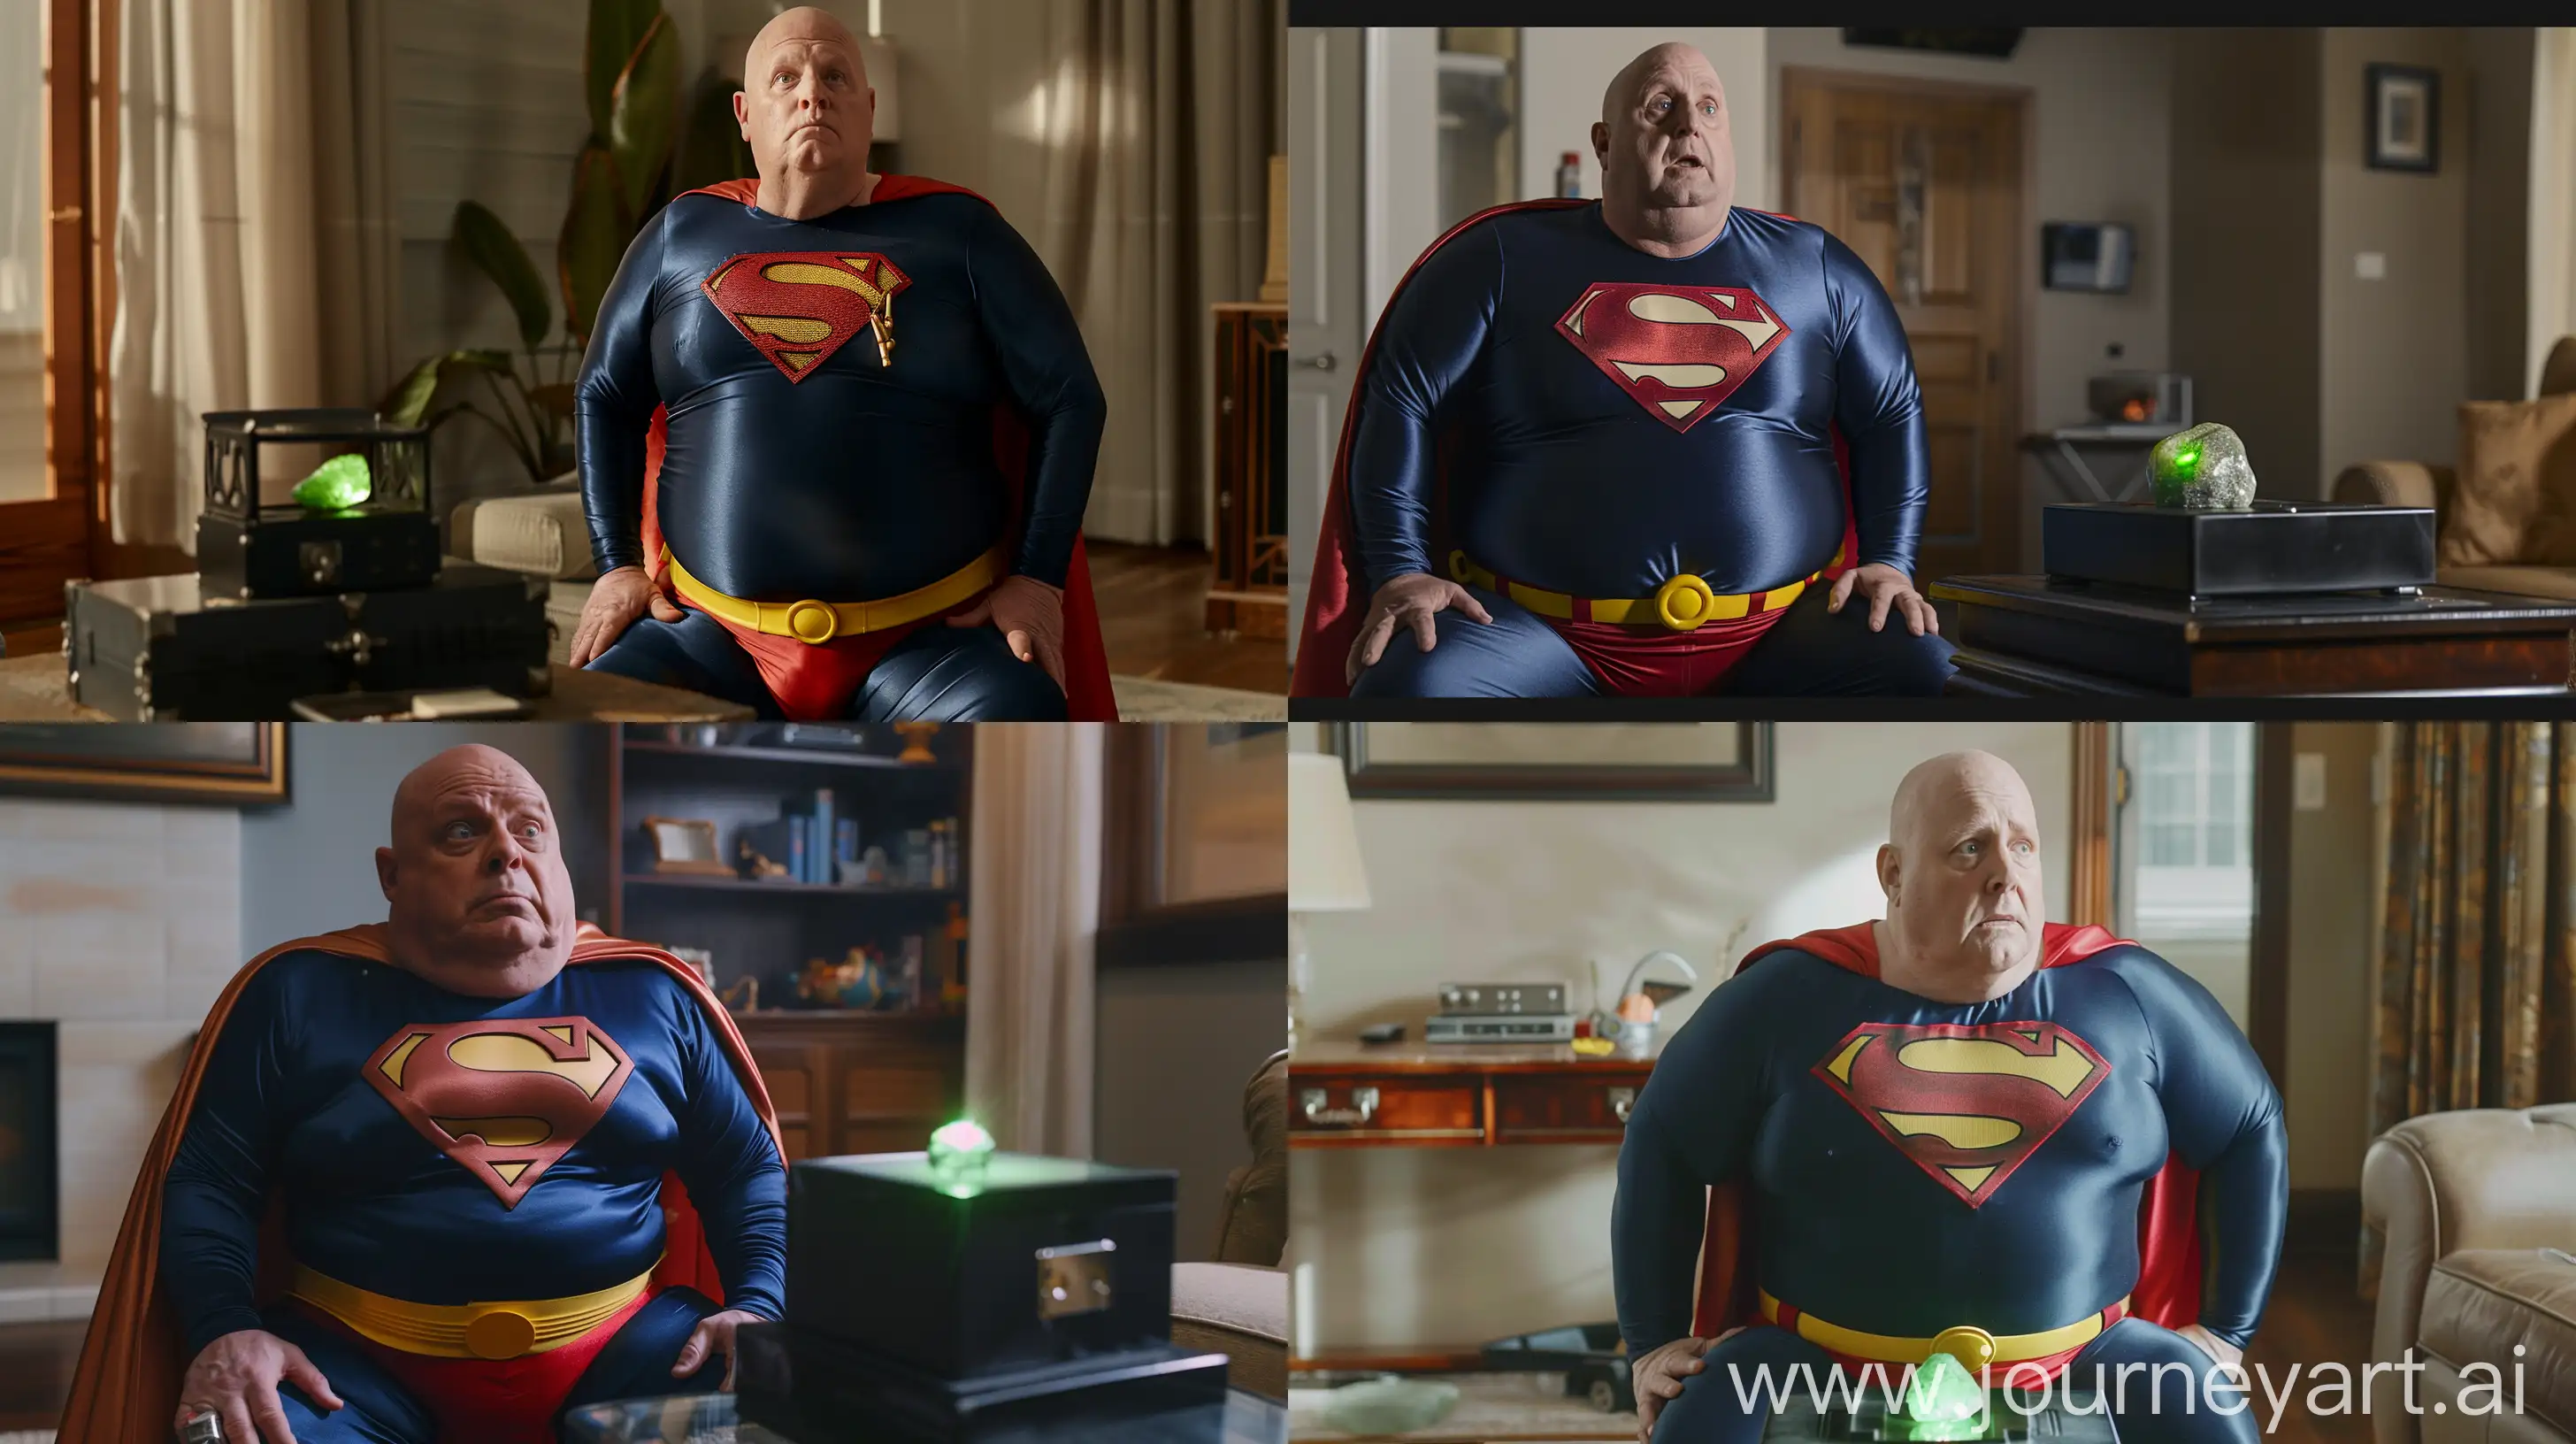 Elderly-Superman-with-Kryptonite-Bald-Man-in-Blue-Suit-and-Red-Cape